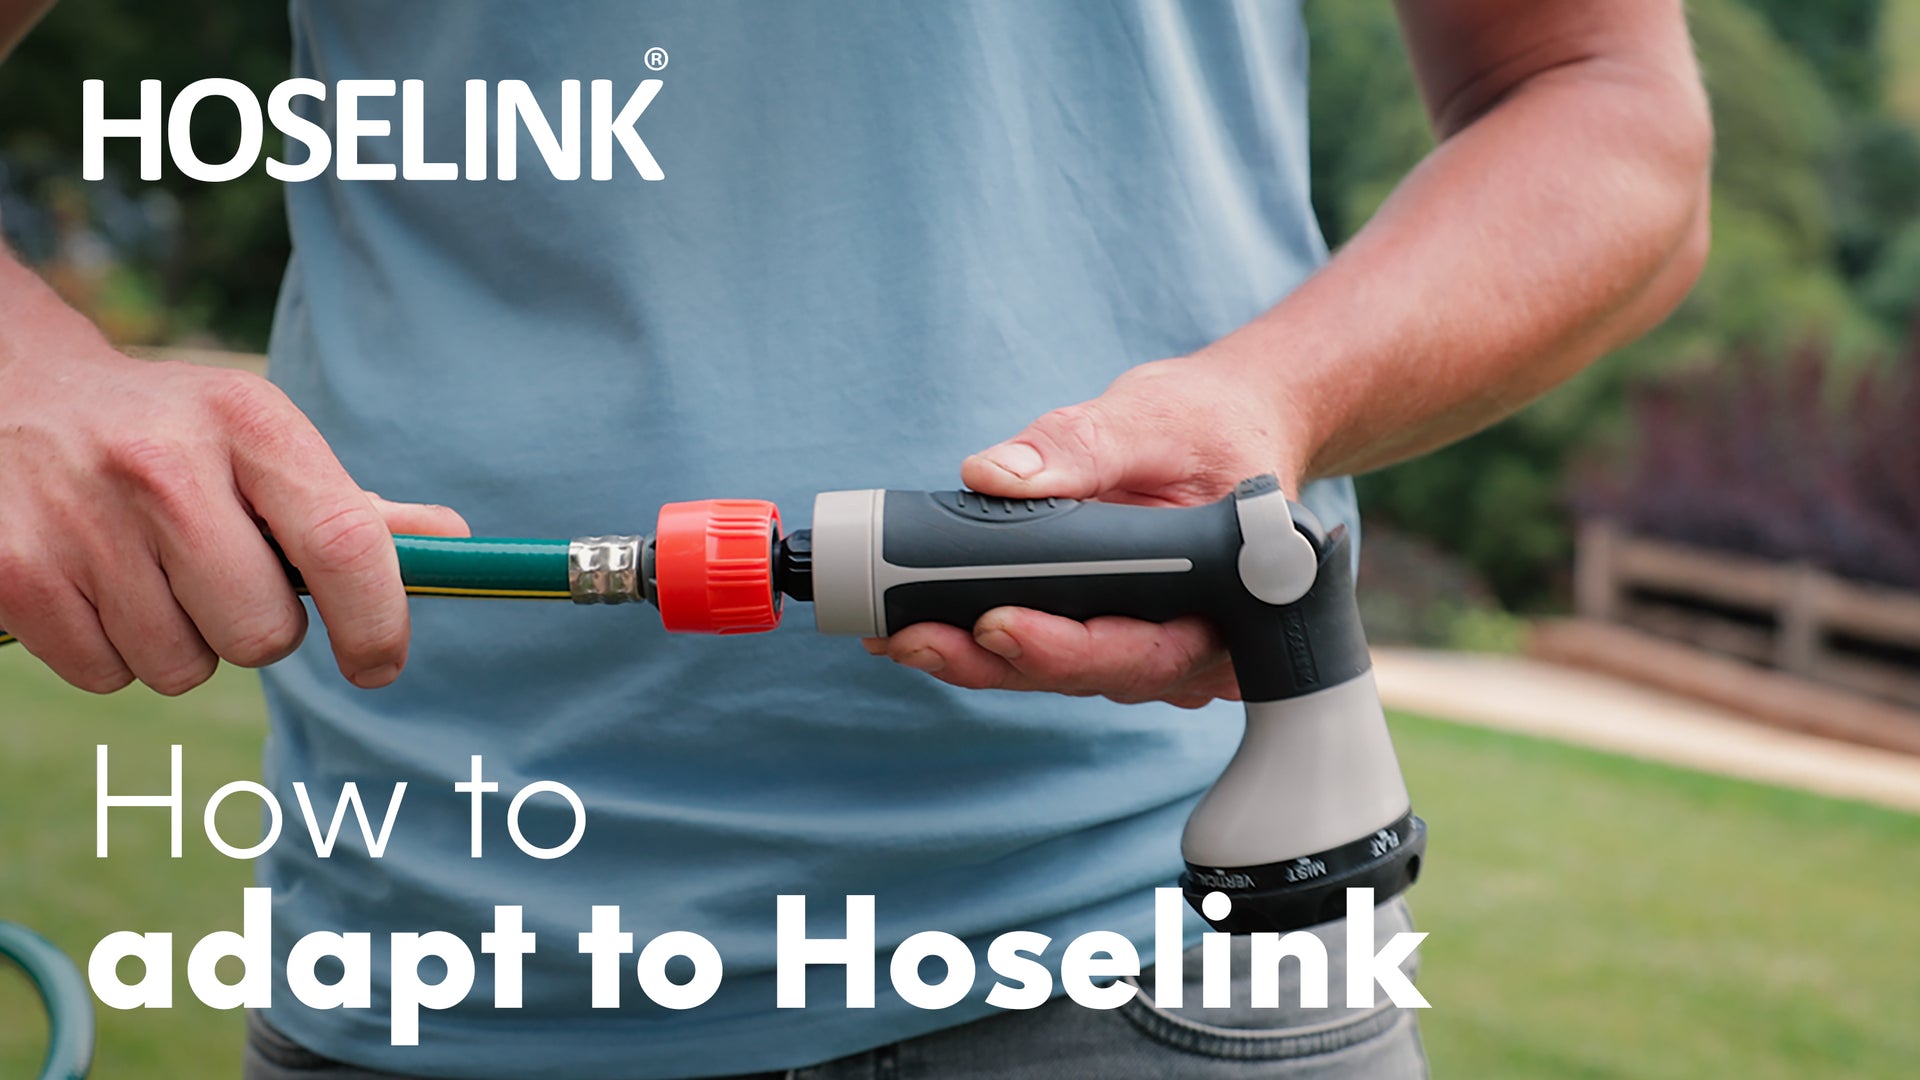 Load video: Explains how to adapt watering accessories from other brands to Hoselink connectors.